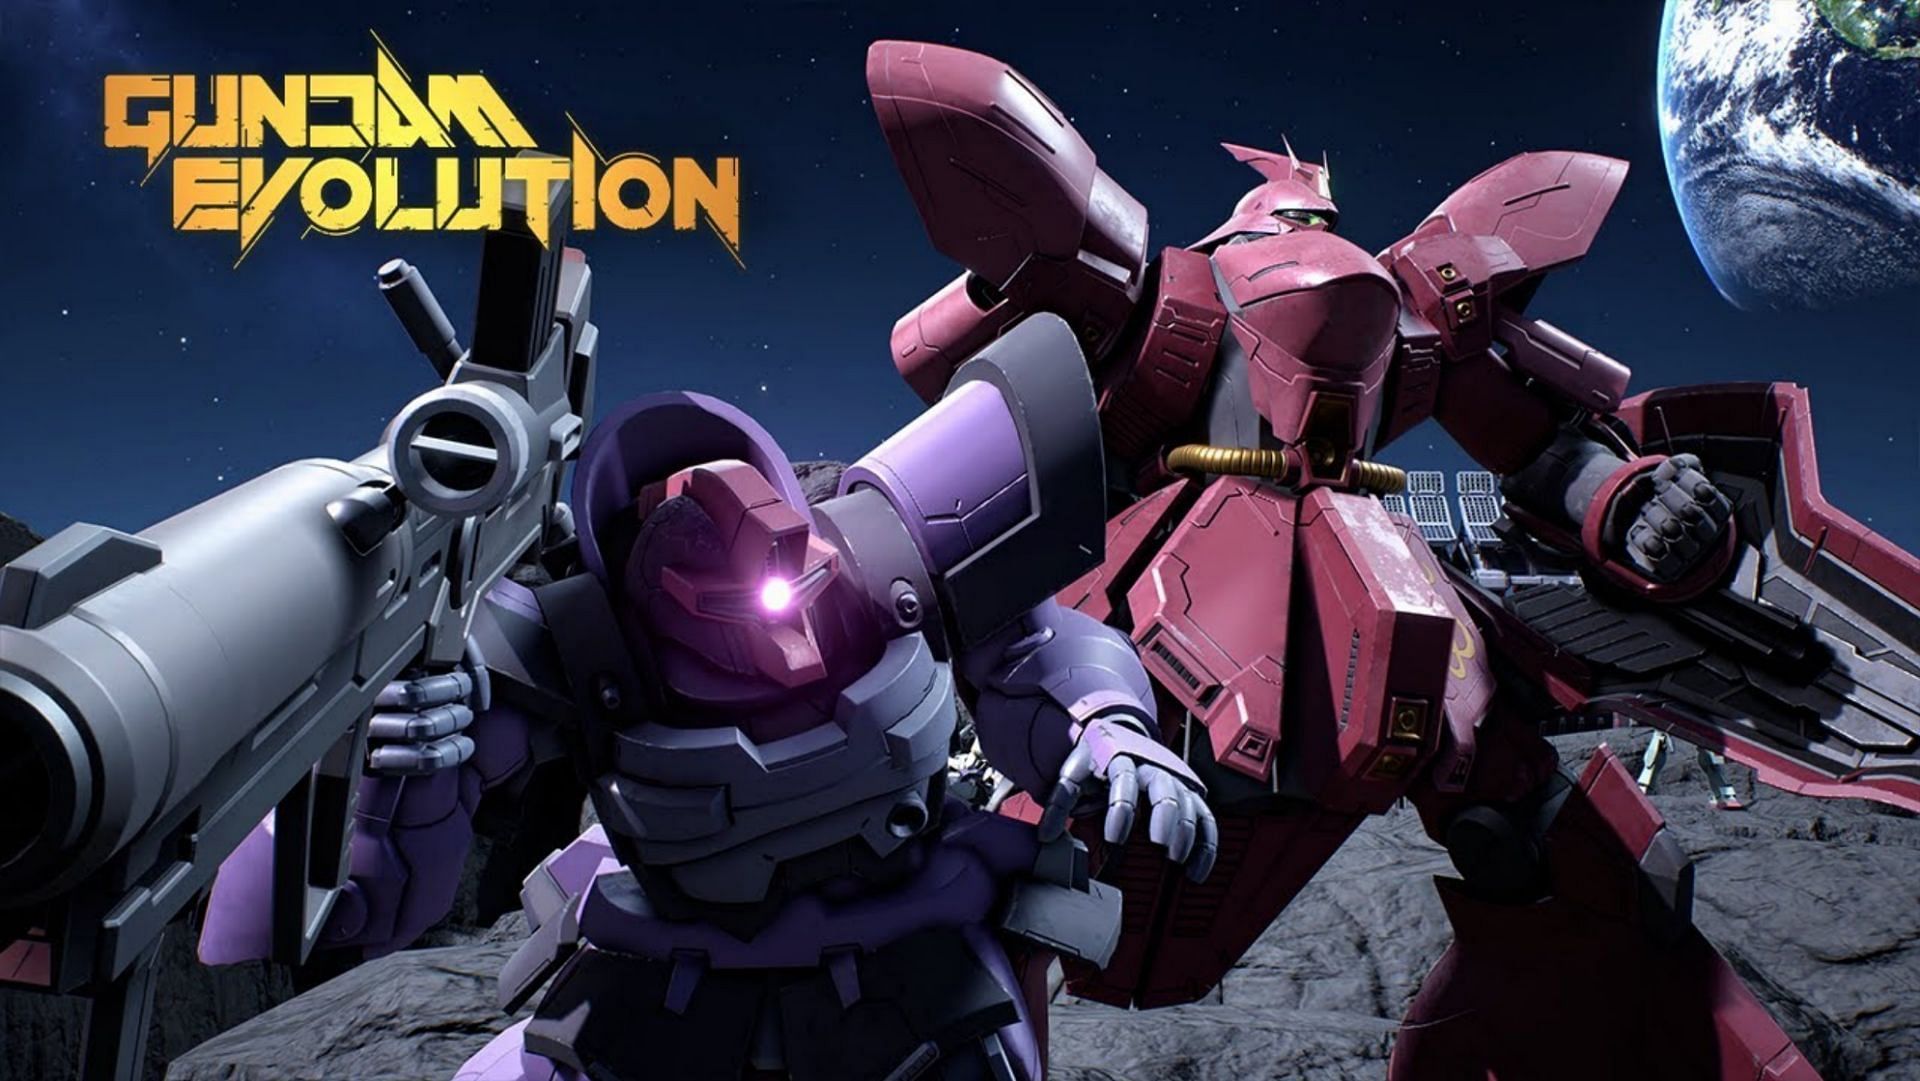 Now that Gundam Evolution is live on PC, which are the most powerful mobile suits in the game? (Image via Bandai Namco)